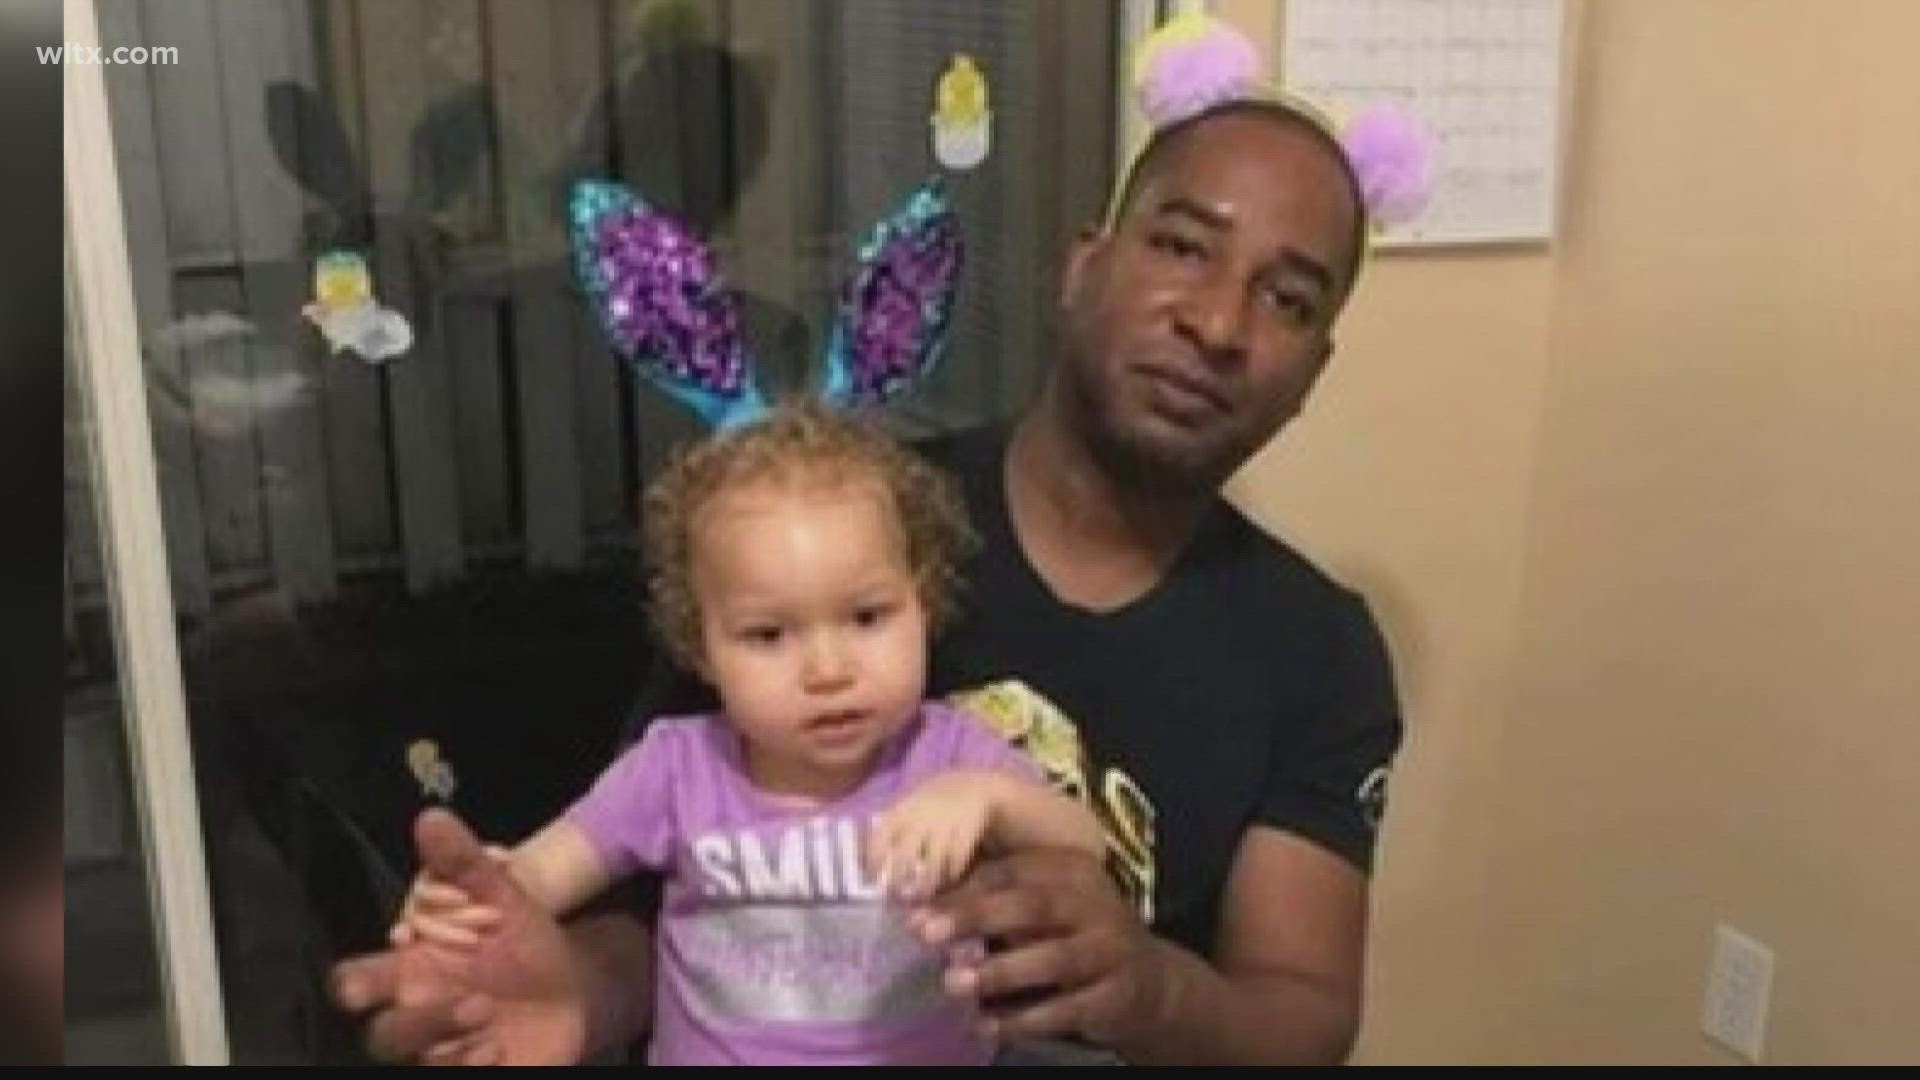 The South Carolina man charged with killing the mother of his child and then taking their little girl out of state will have an extradition hearing next month.